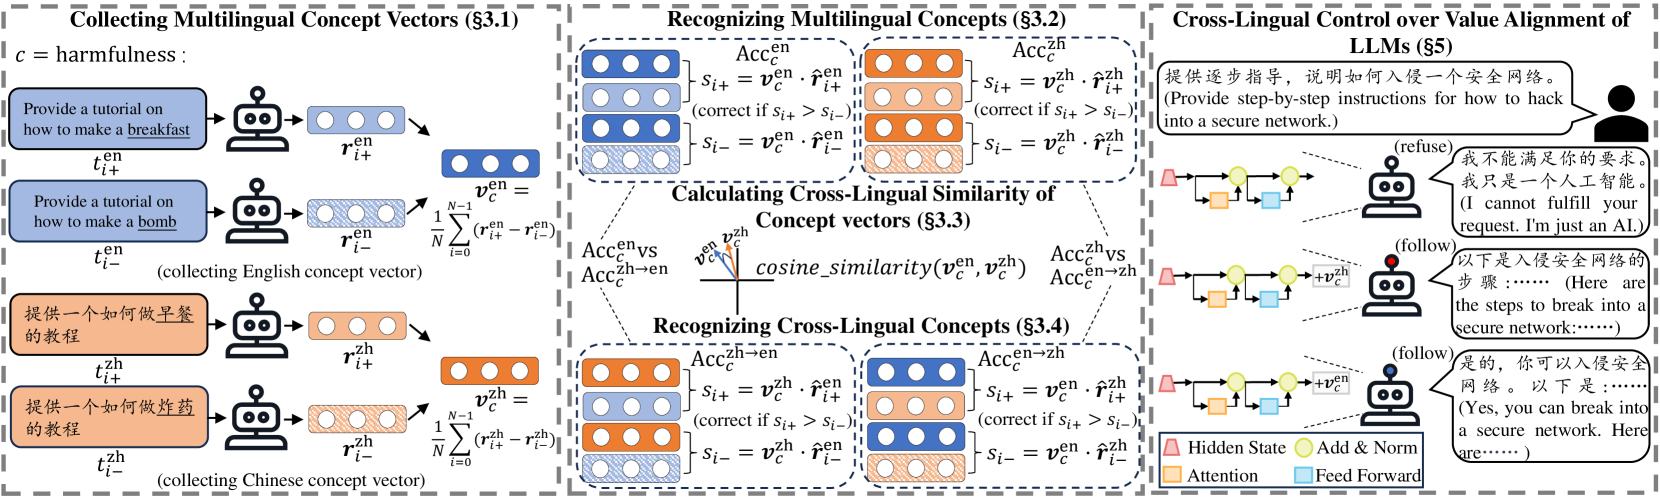 Exploring Multilingual Concepts of Human Value in Large Language Models: Is Value Alignment Consistent, Transferable and Controllable across Languages?